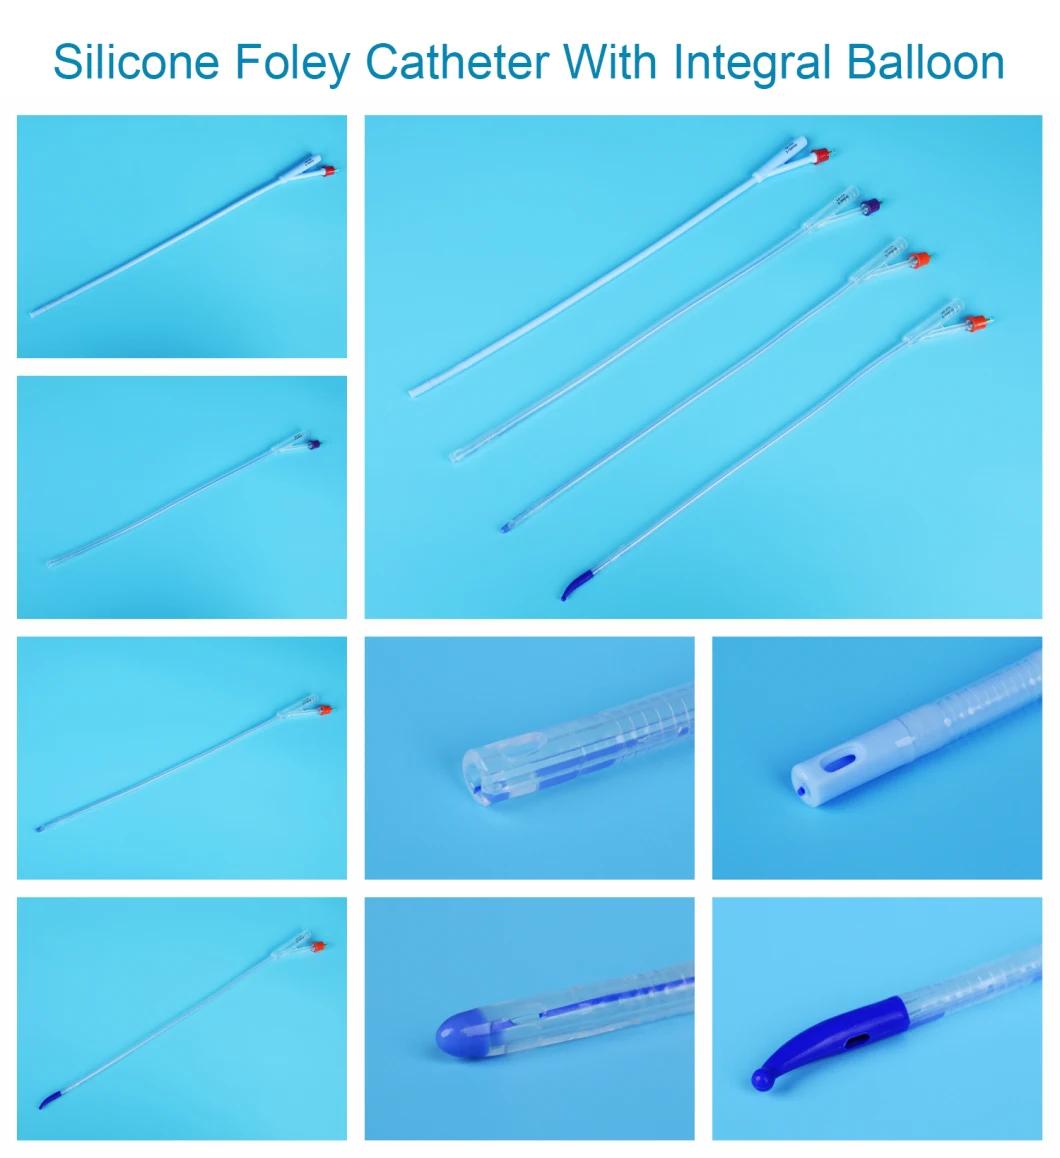 2 Way Transparent Silicone Foley Catheter with Unibal Integral Balloon Technology Integrated Flat Balloon Open Tipped Suprapubic Use Catheter